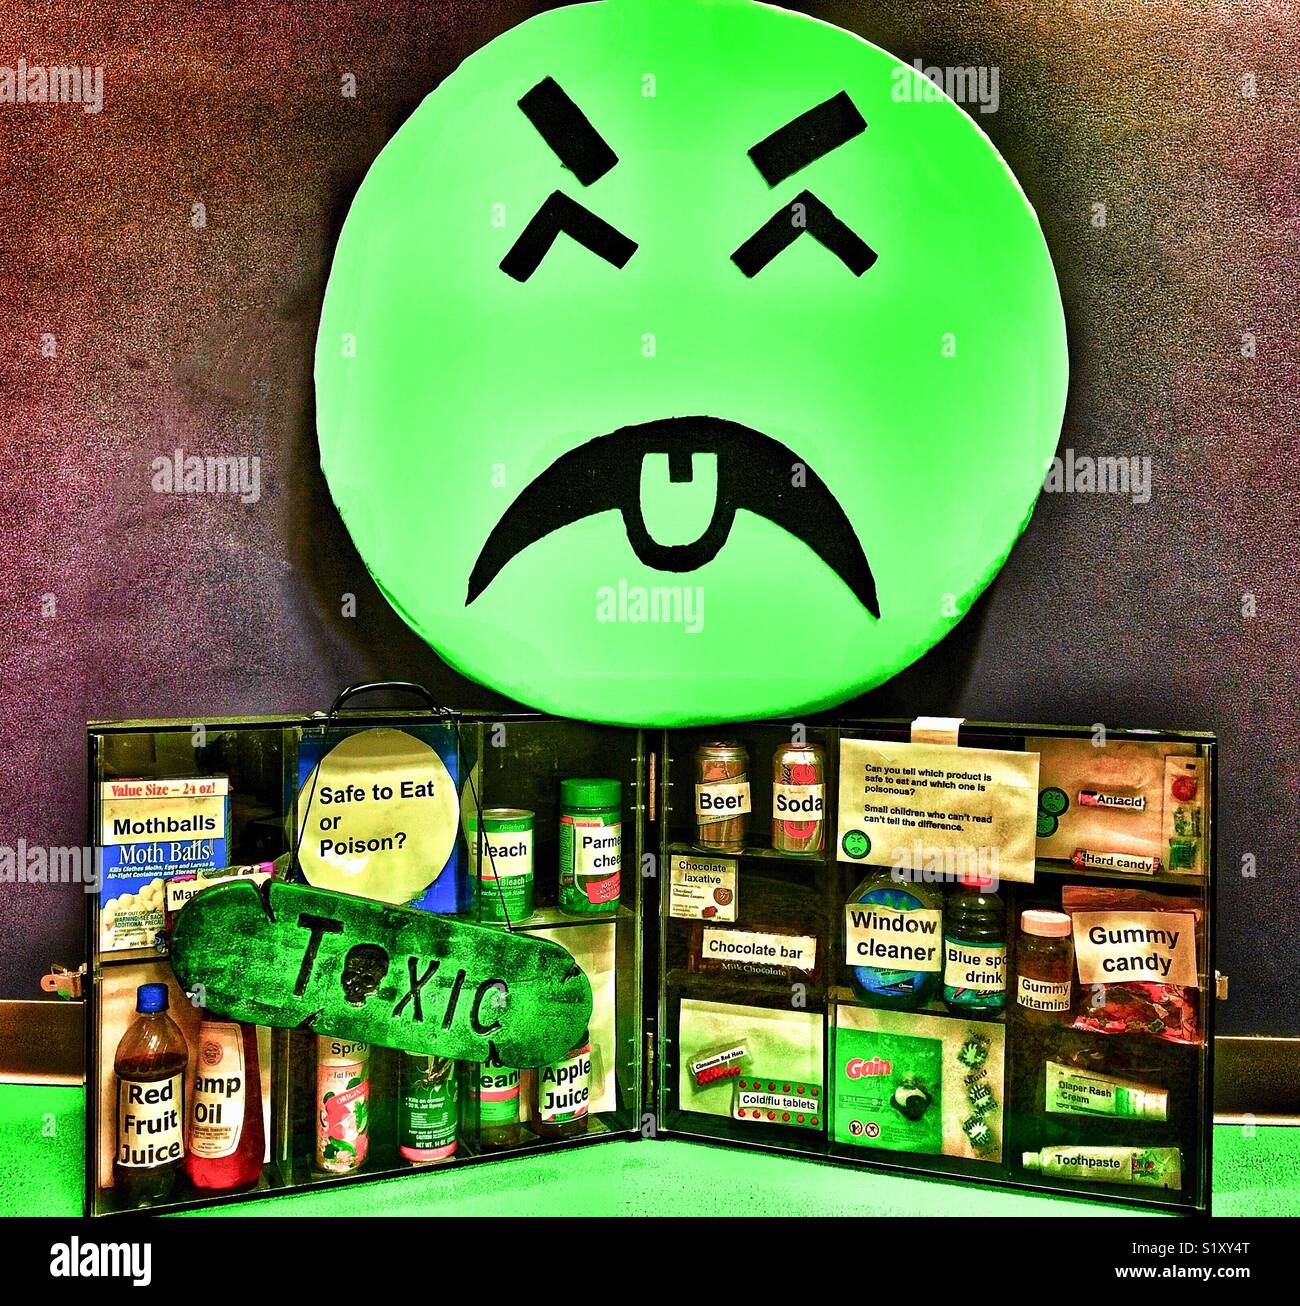 Mr YUK with a display of household objects that can be confused with dangerous substances by children Stock Photo